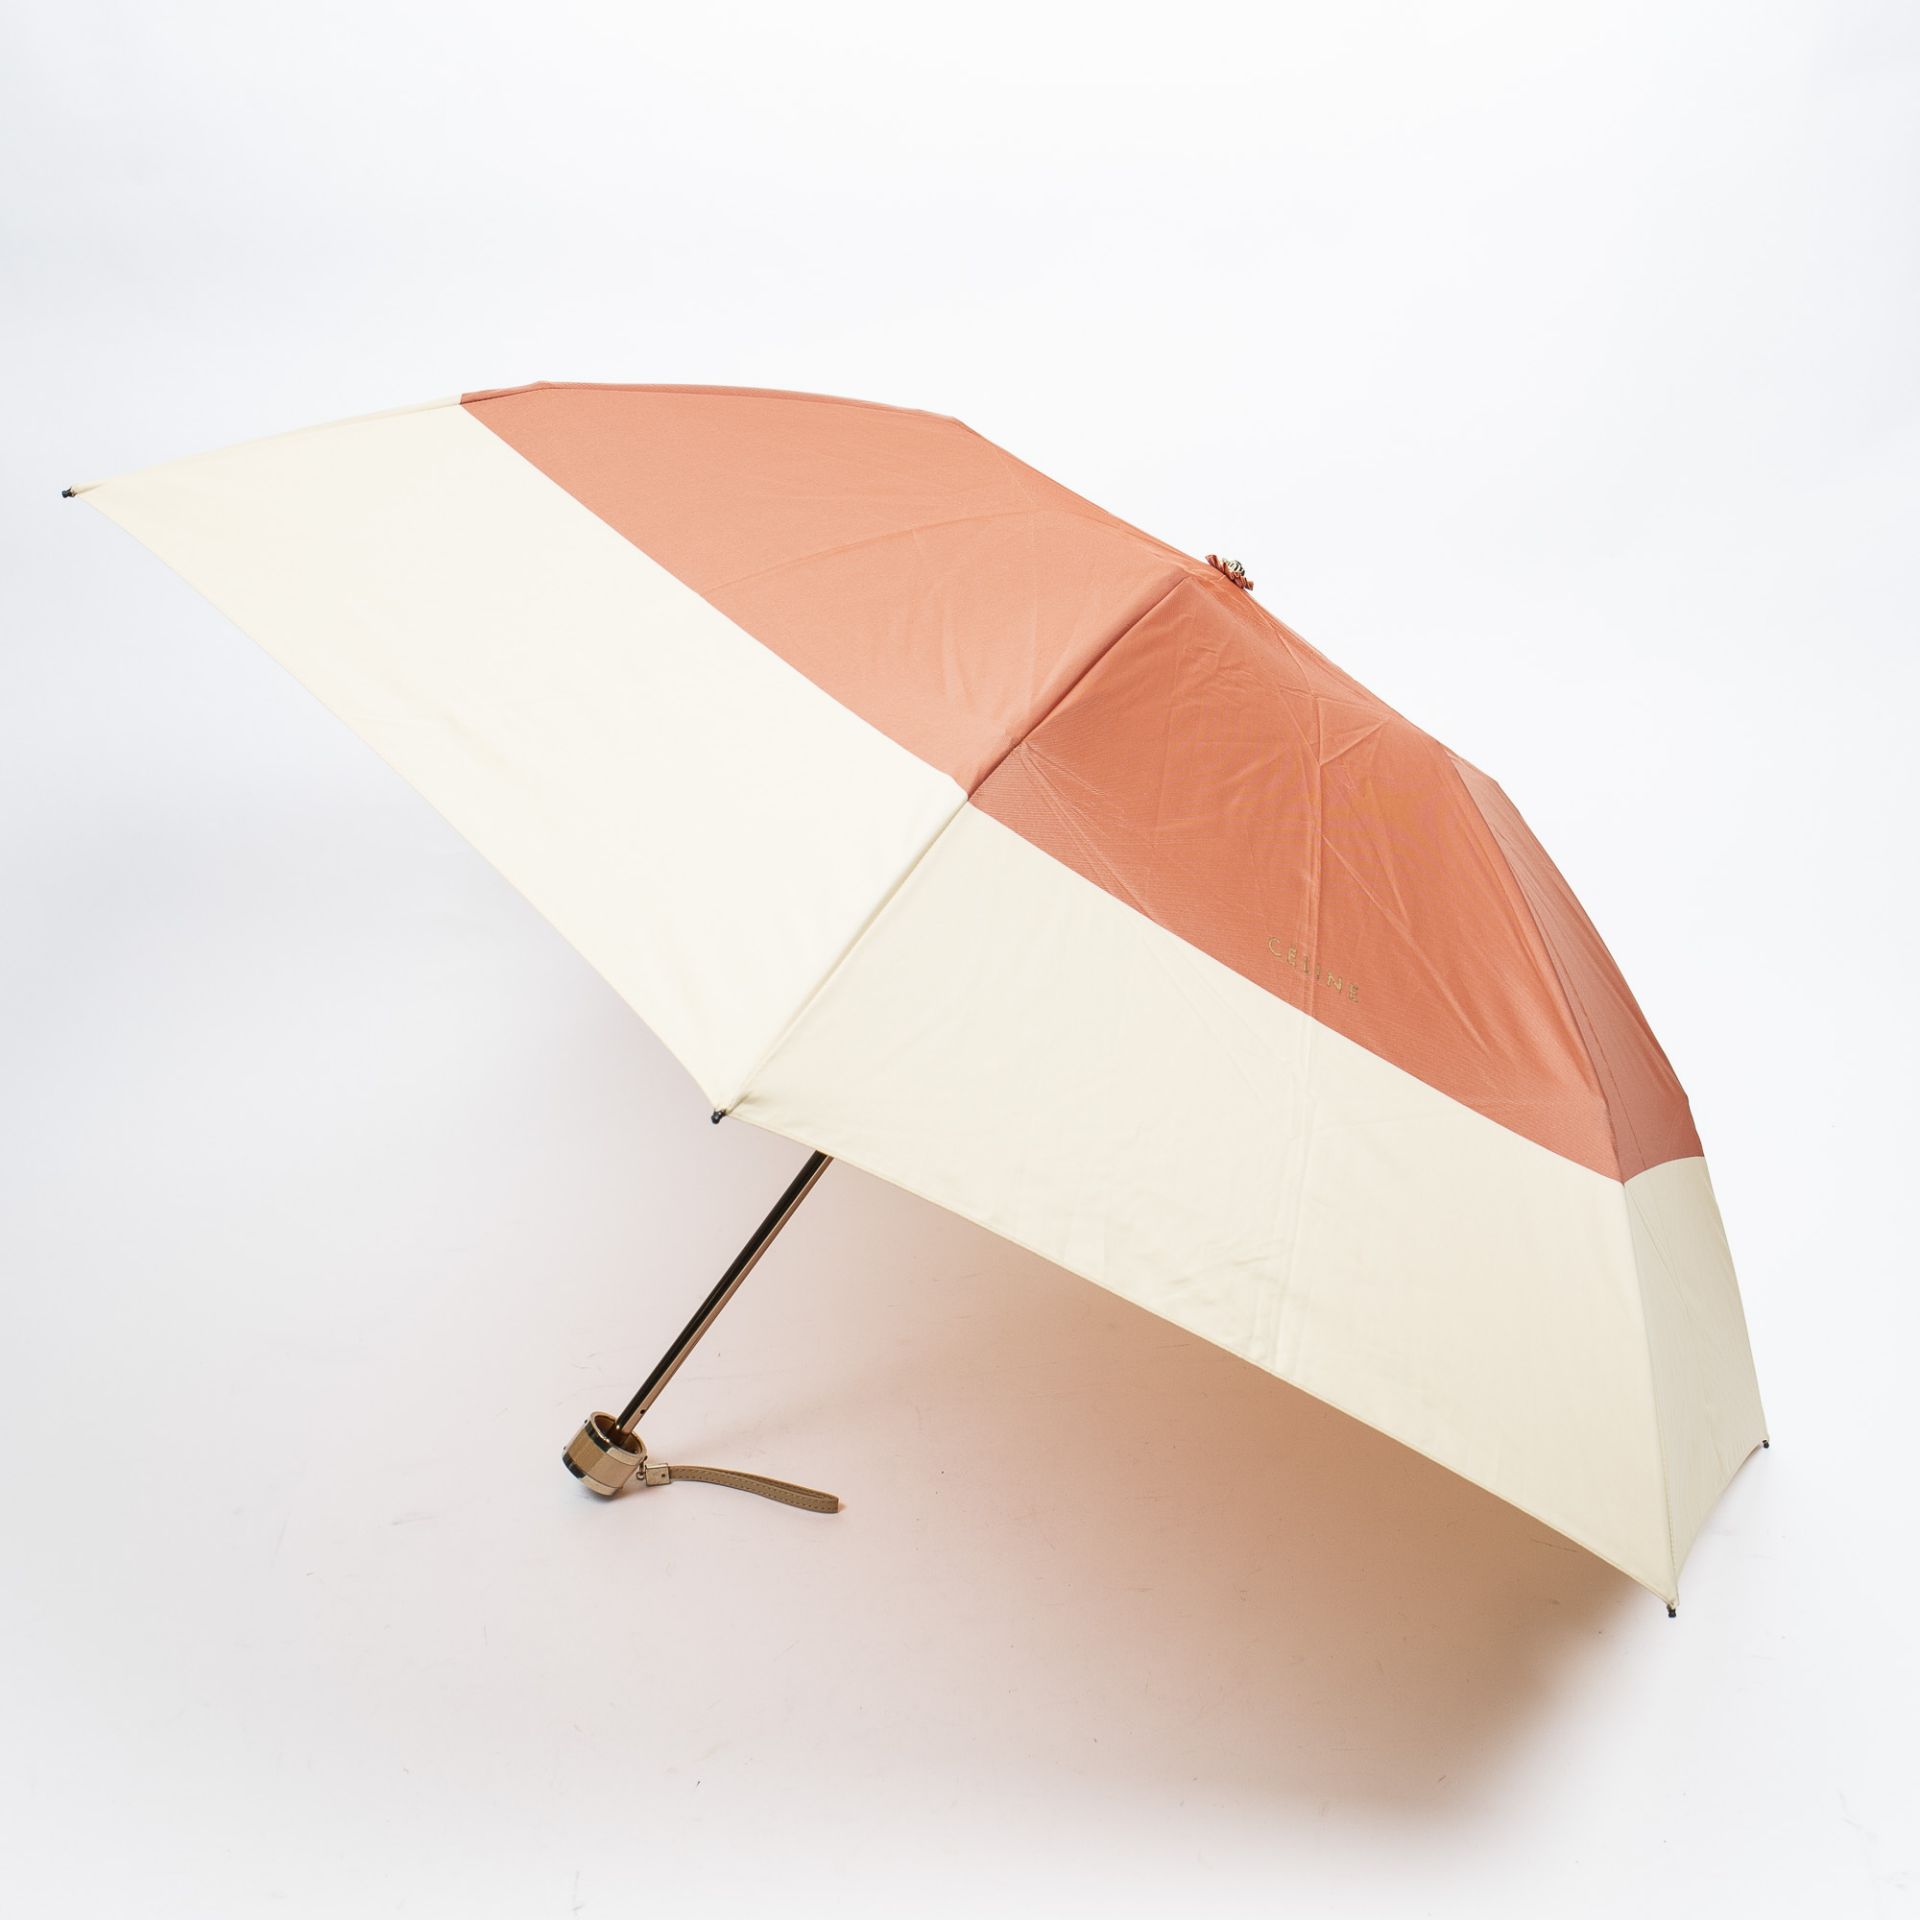 RRP £425.00 Lot To Contain 1 Celine Canvas Two Tone Folding Umbrella Accessories In Beige/Terracotta - Image 2 of 3